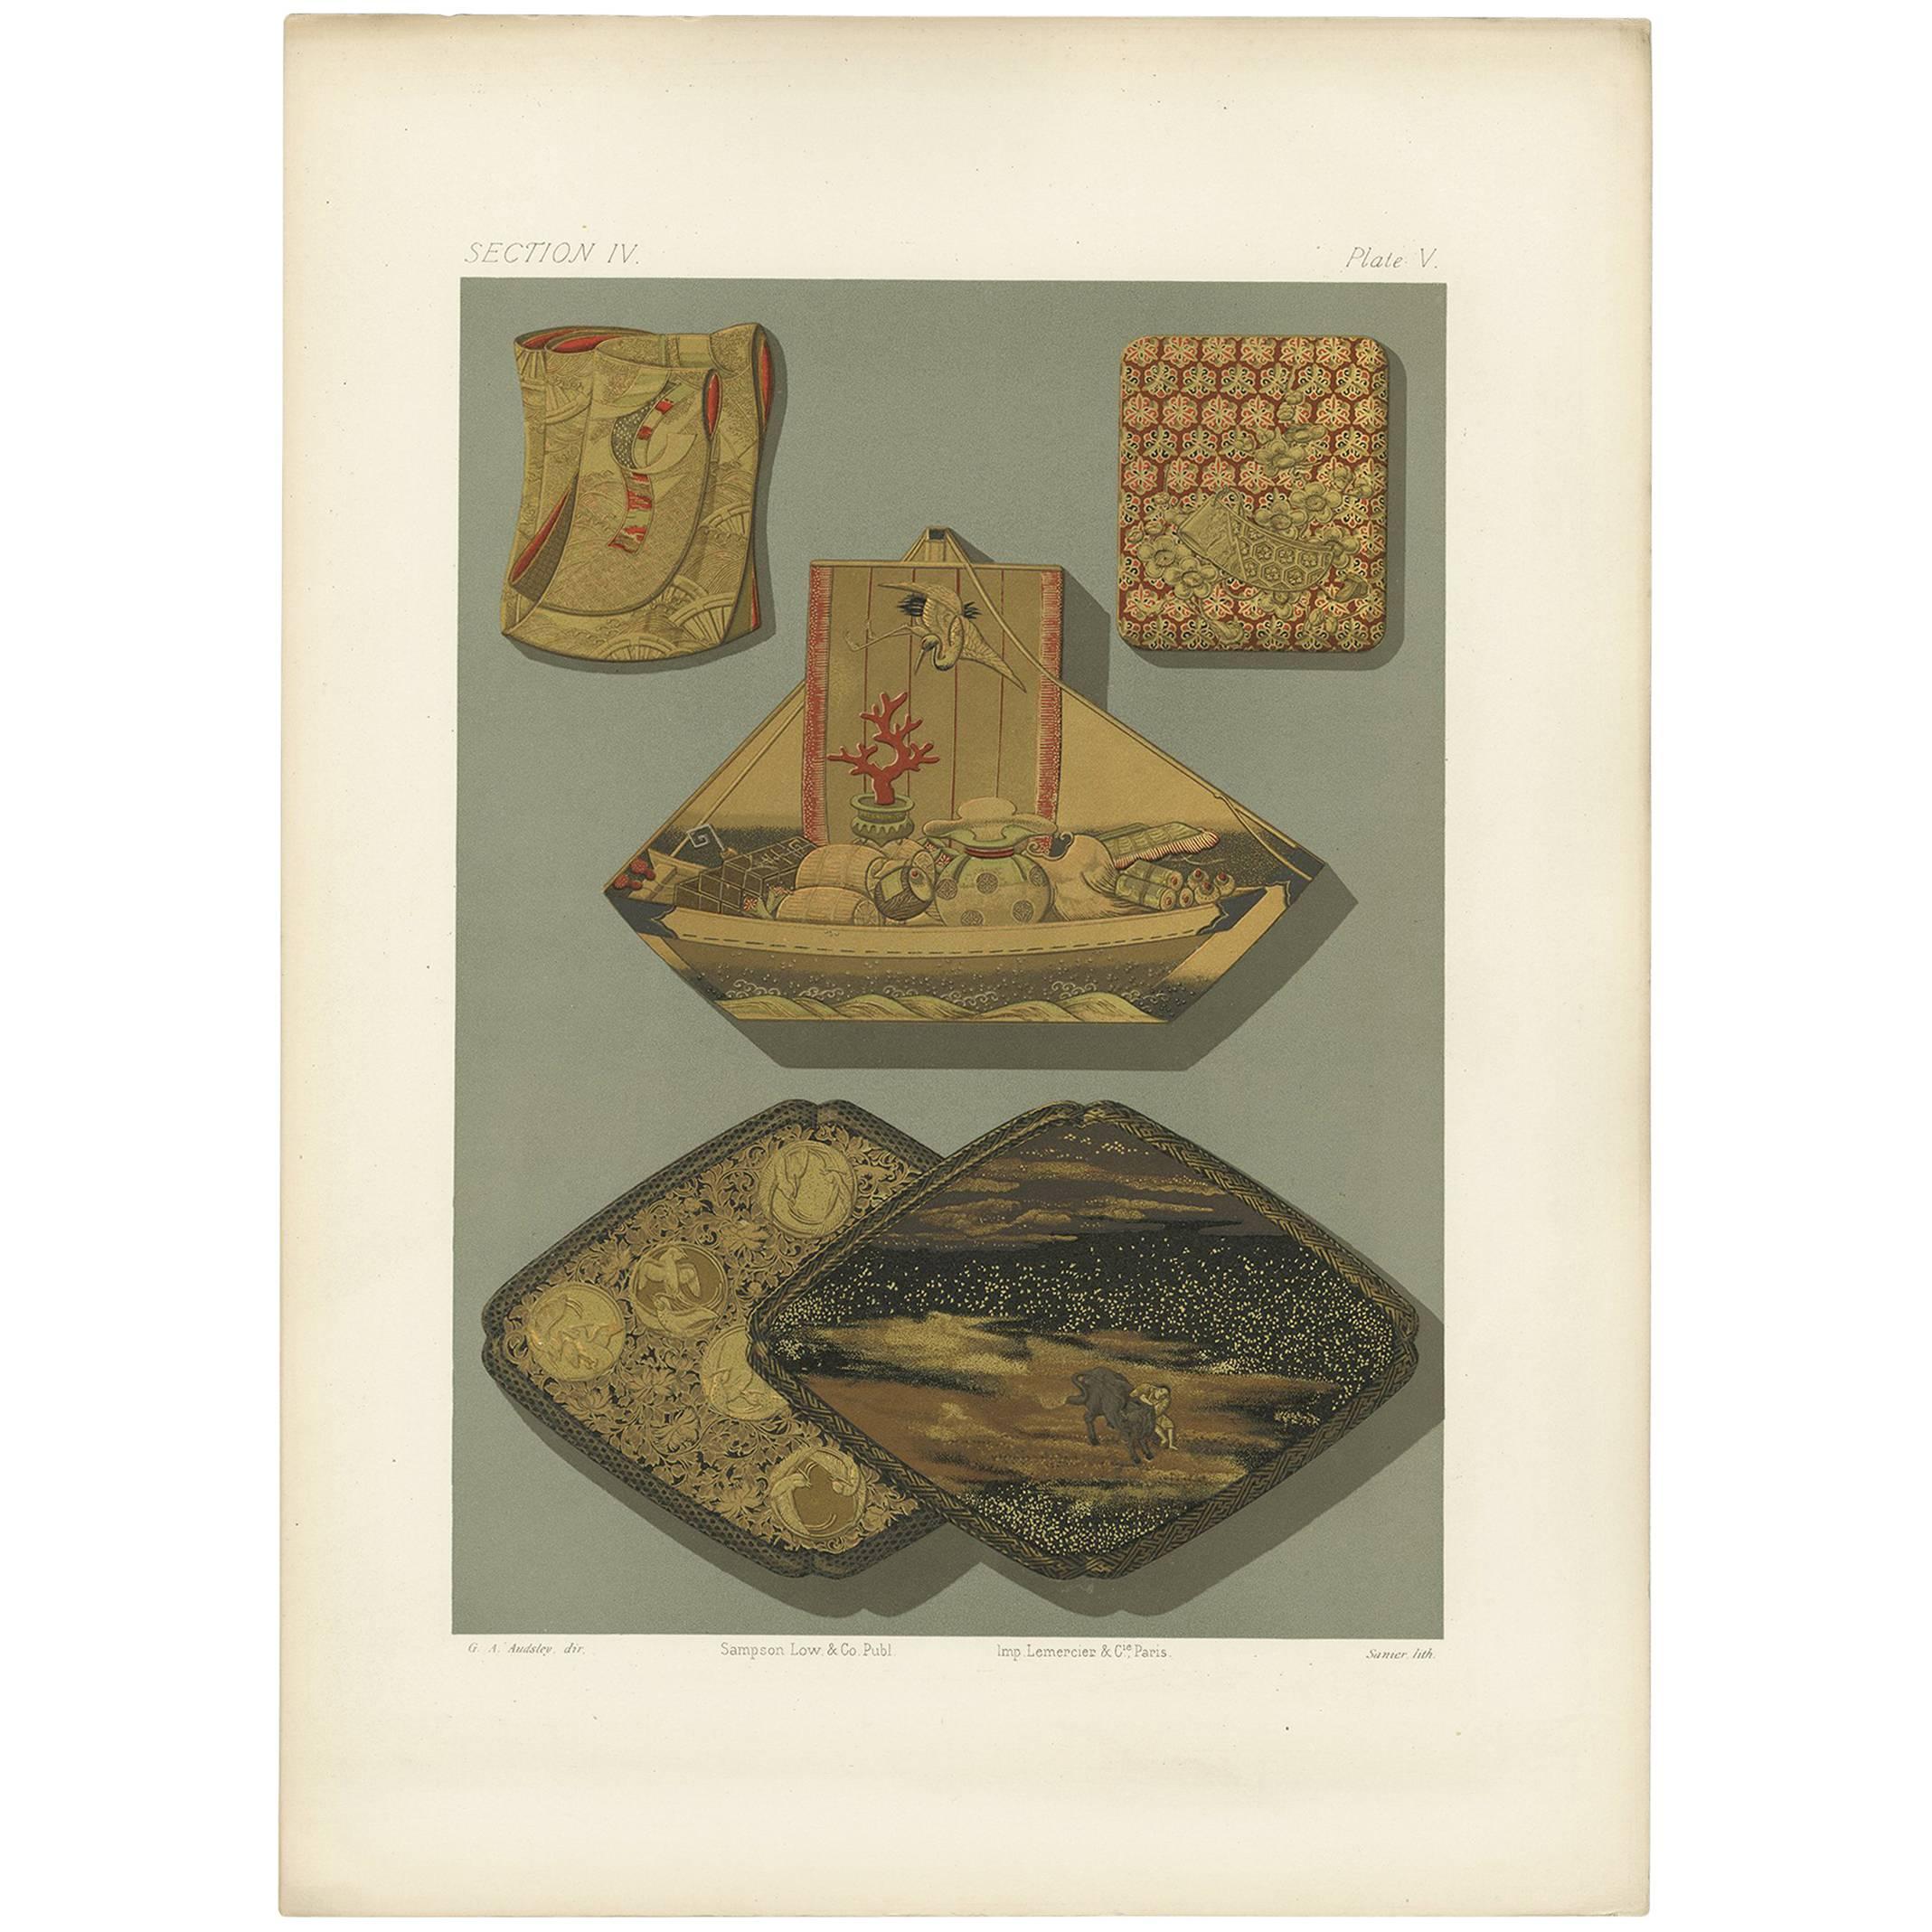 Antique Print of Japanese Box Elements, Lacquer by G. Audsley, 1882